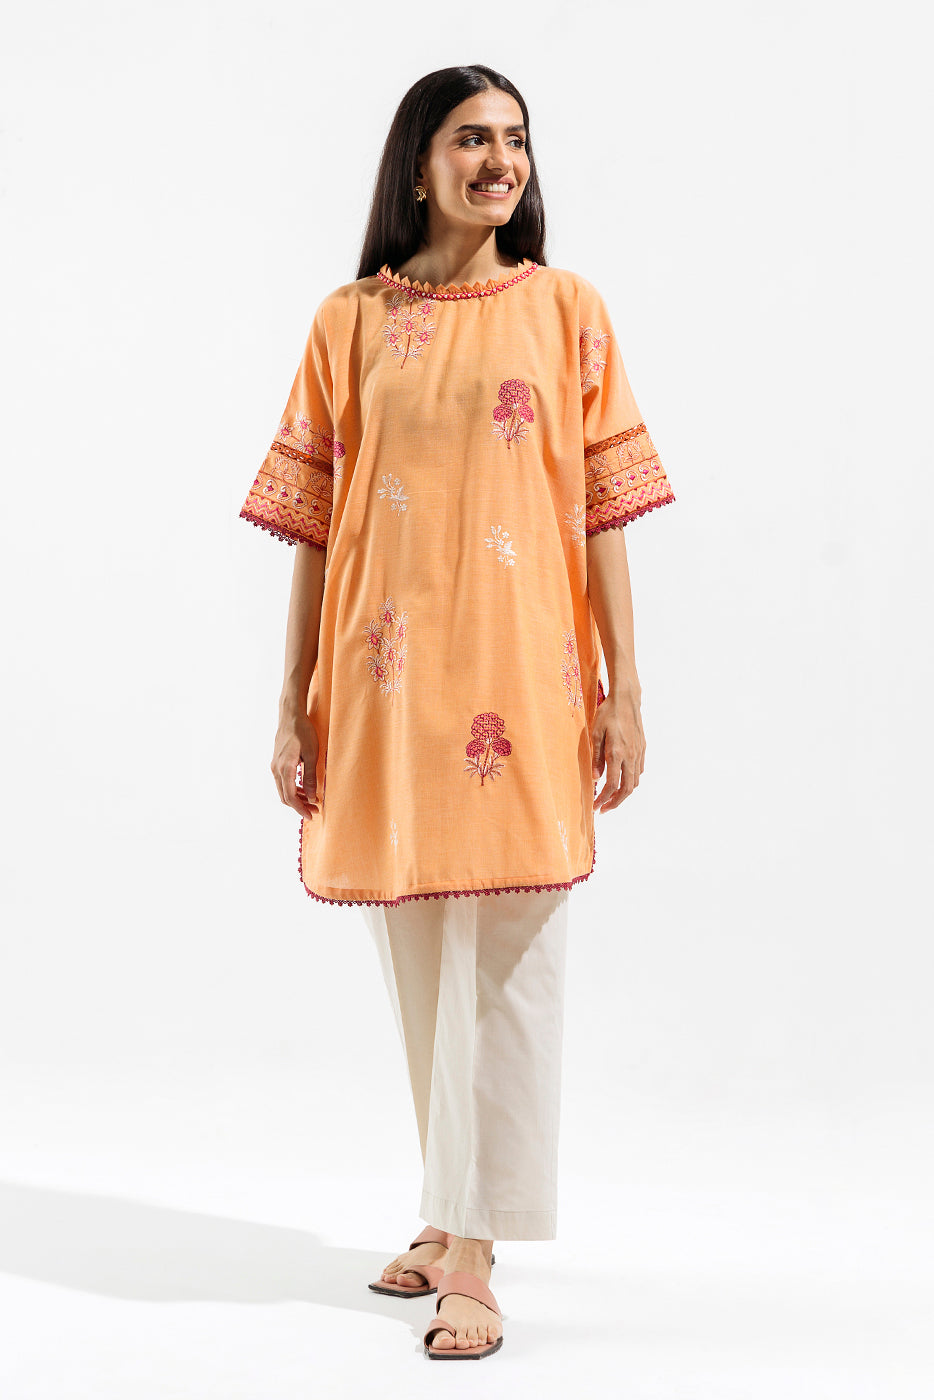 1 PIECE - EMBROIDERED YARN DYED SHIRT - PEACH TWILL (UNSTITCHED) - BEECHTREE